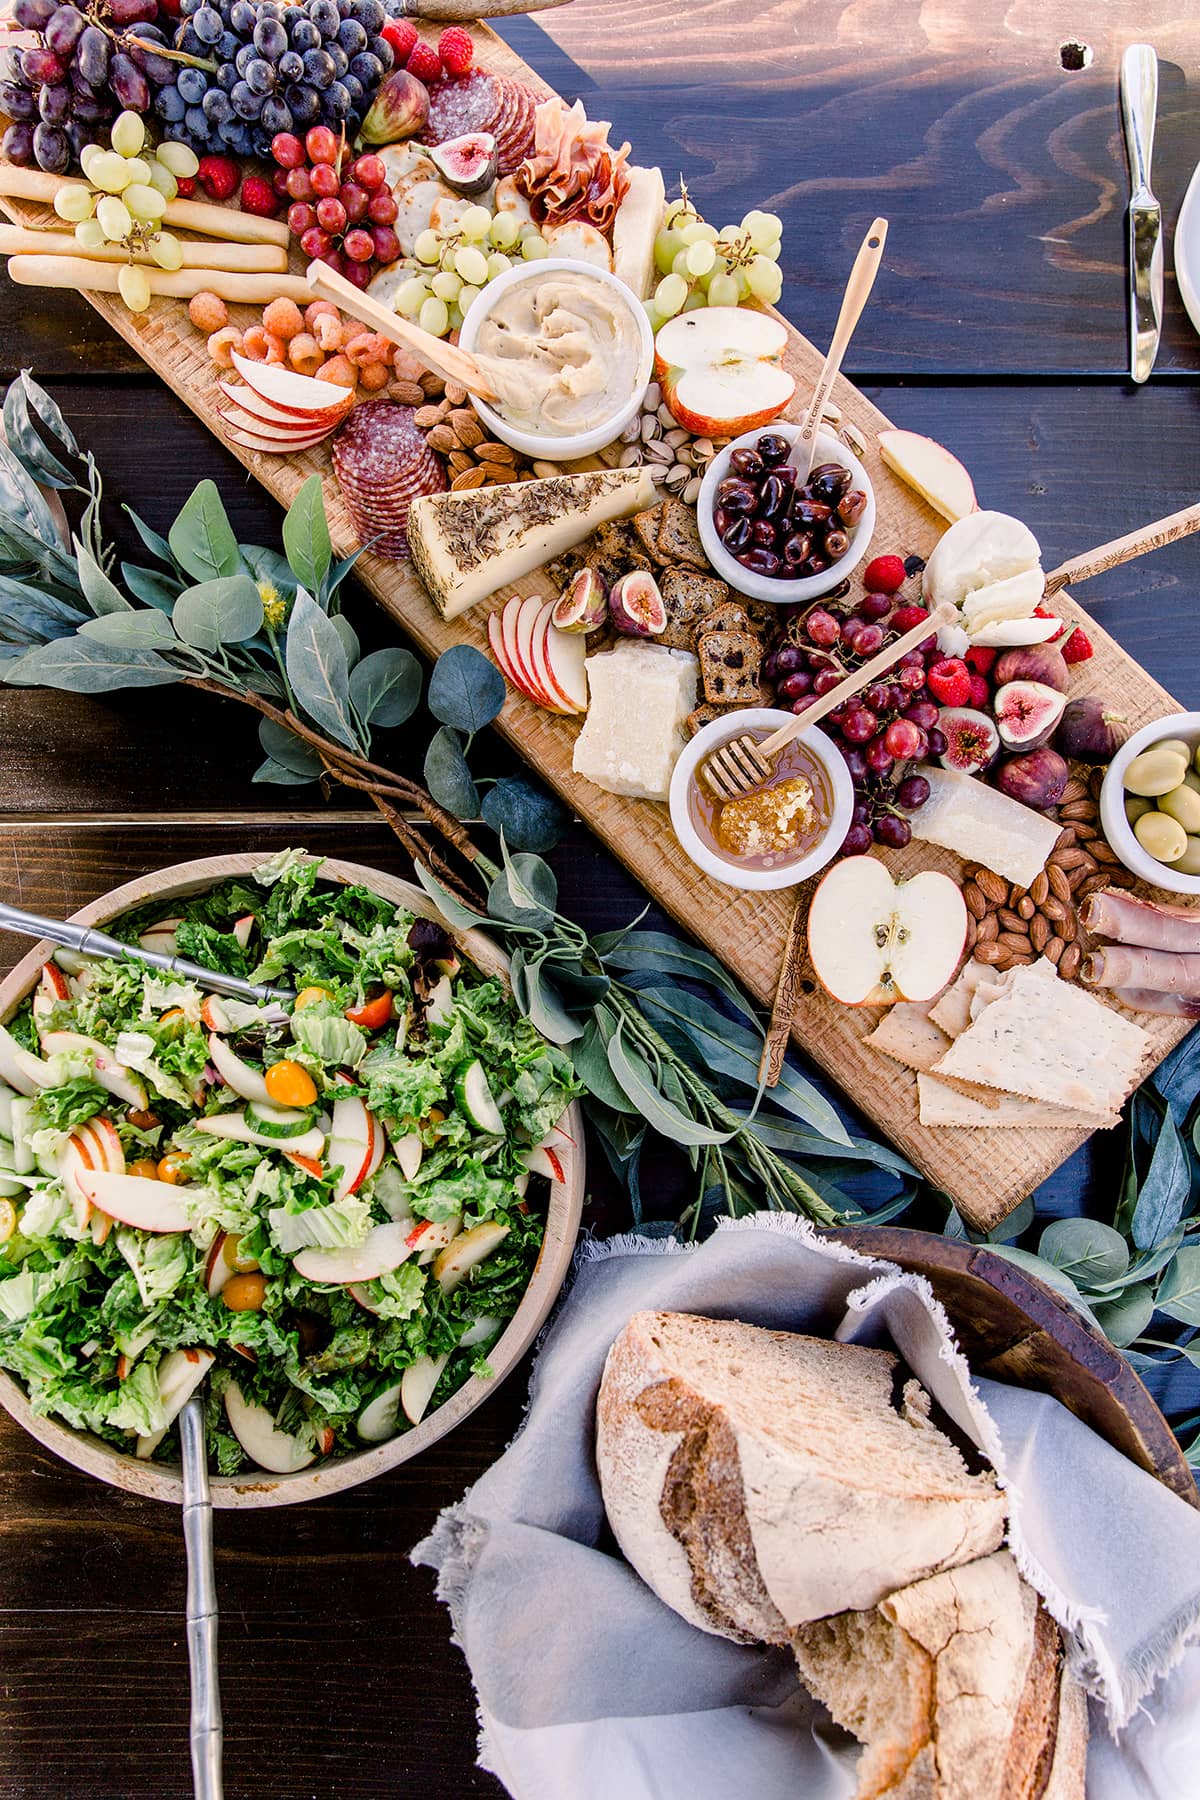 family table set with fruits, nuts, cheeses, a large fresh veggie salad.